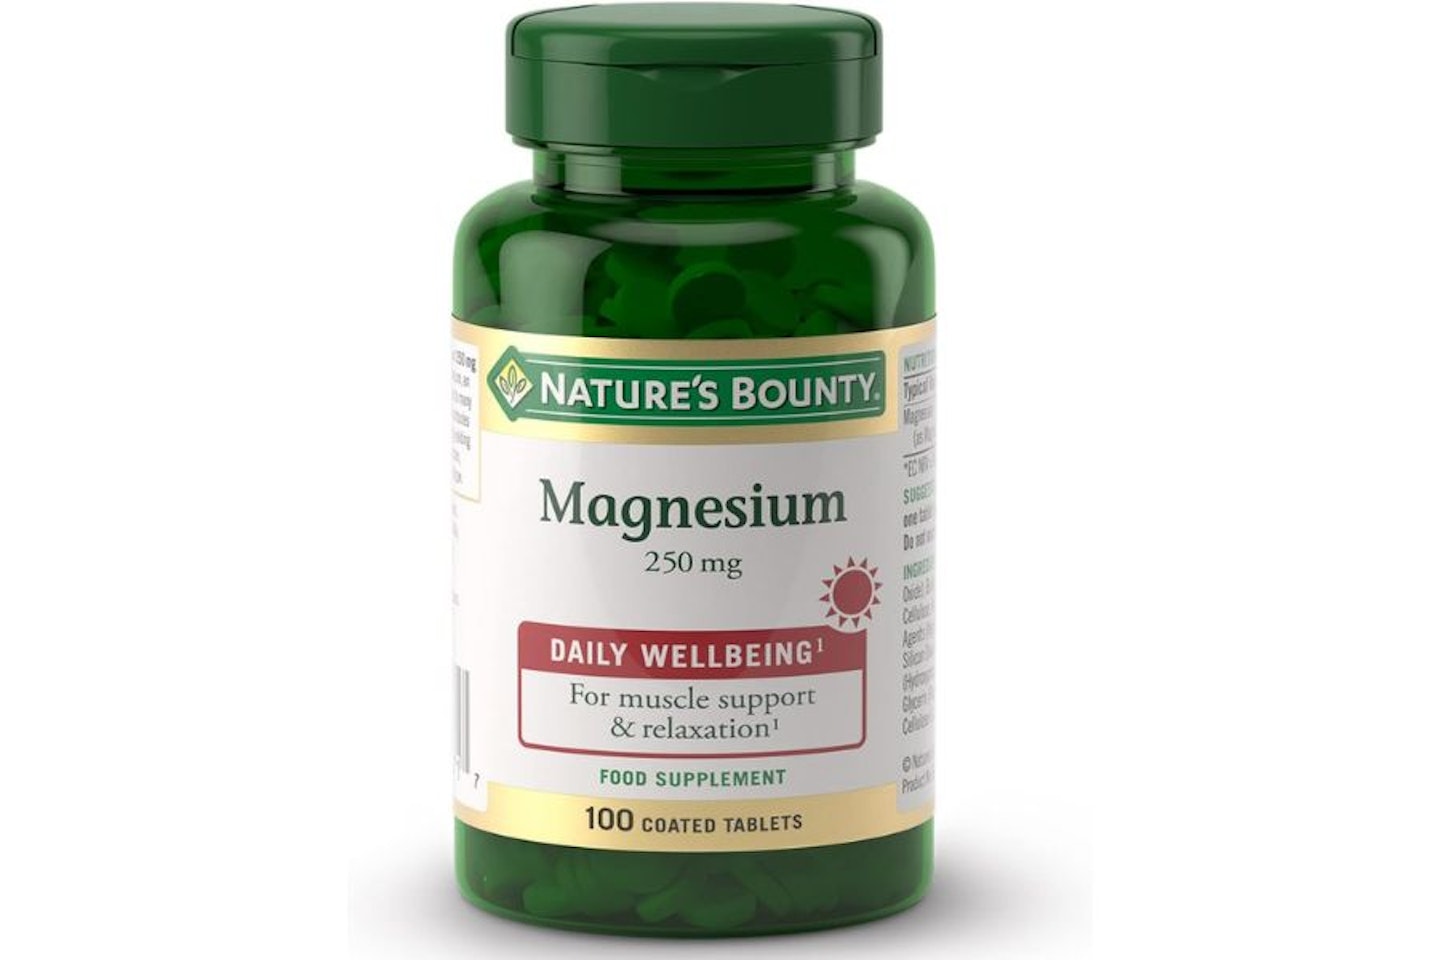 Nature's Bounty Magnesium Tablets